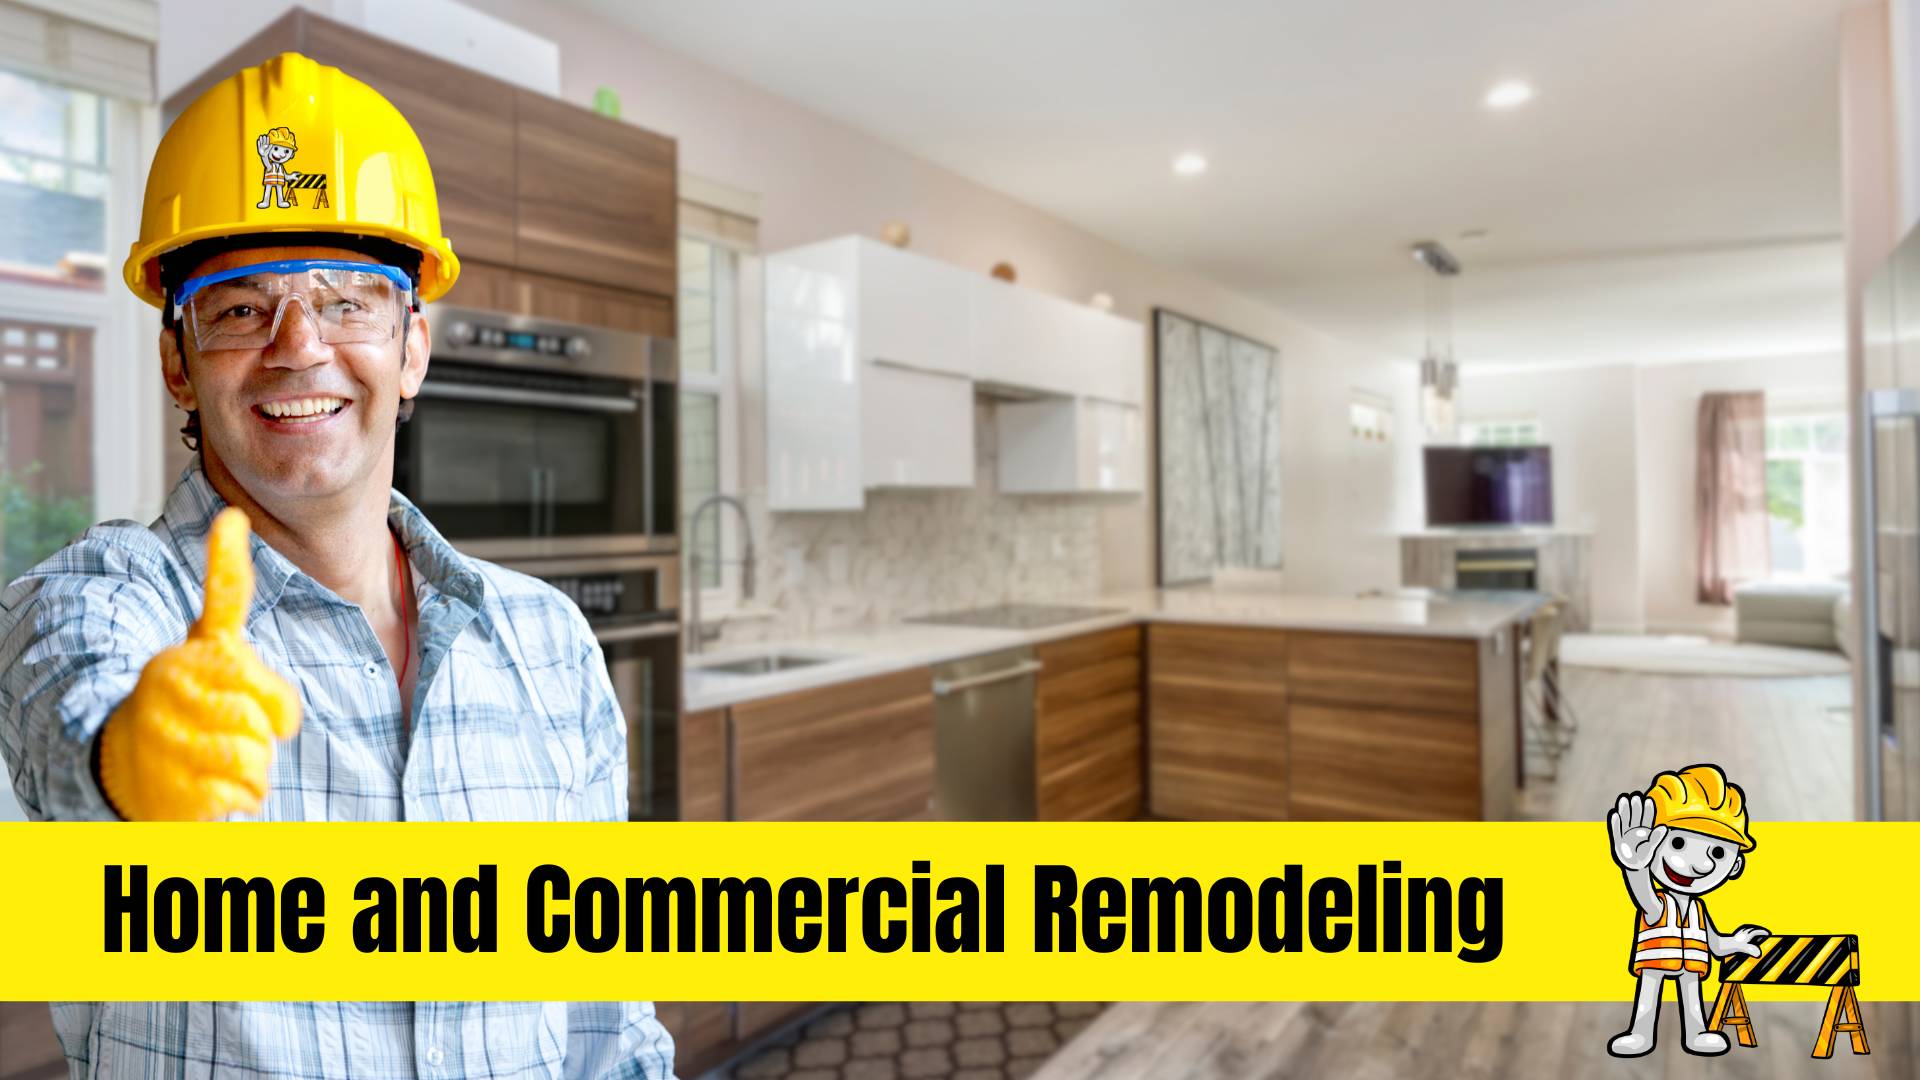 Home and Commercial Remodeling